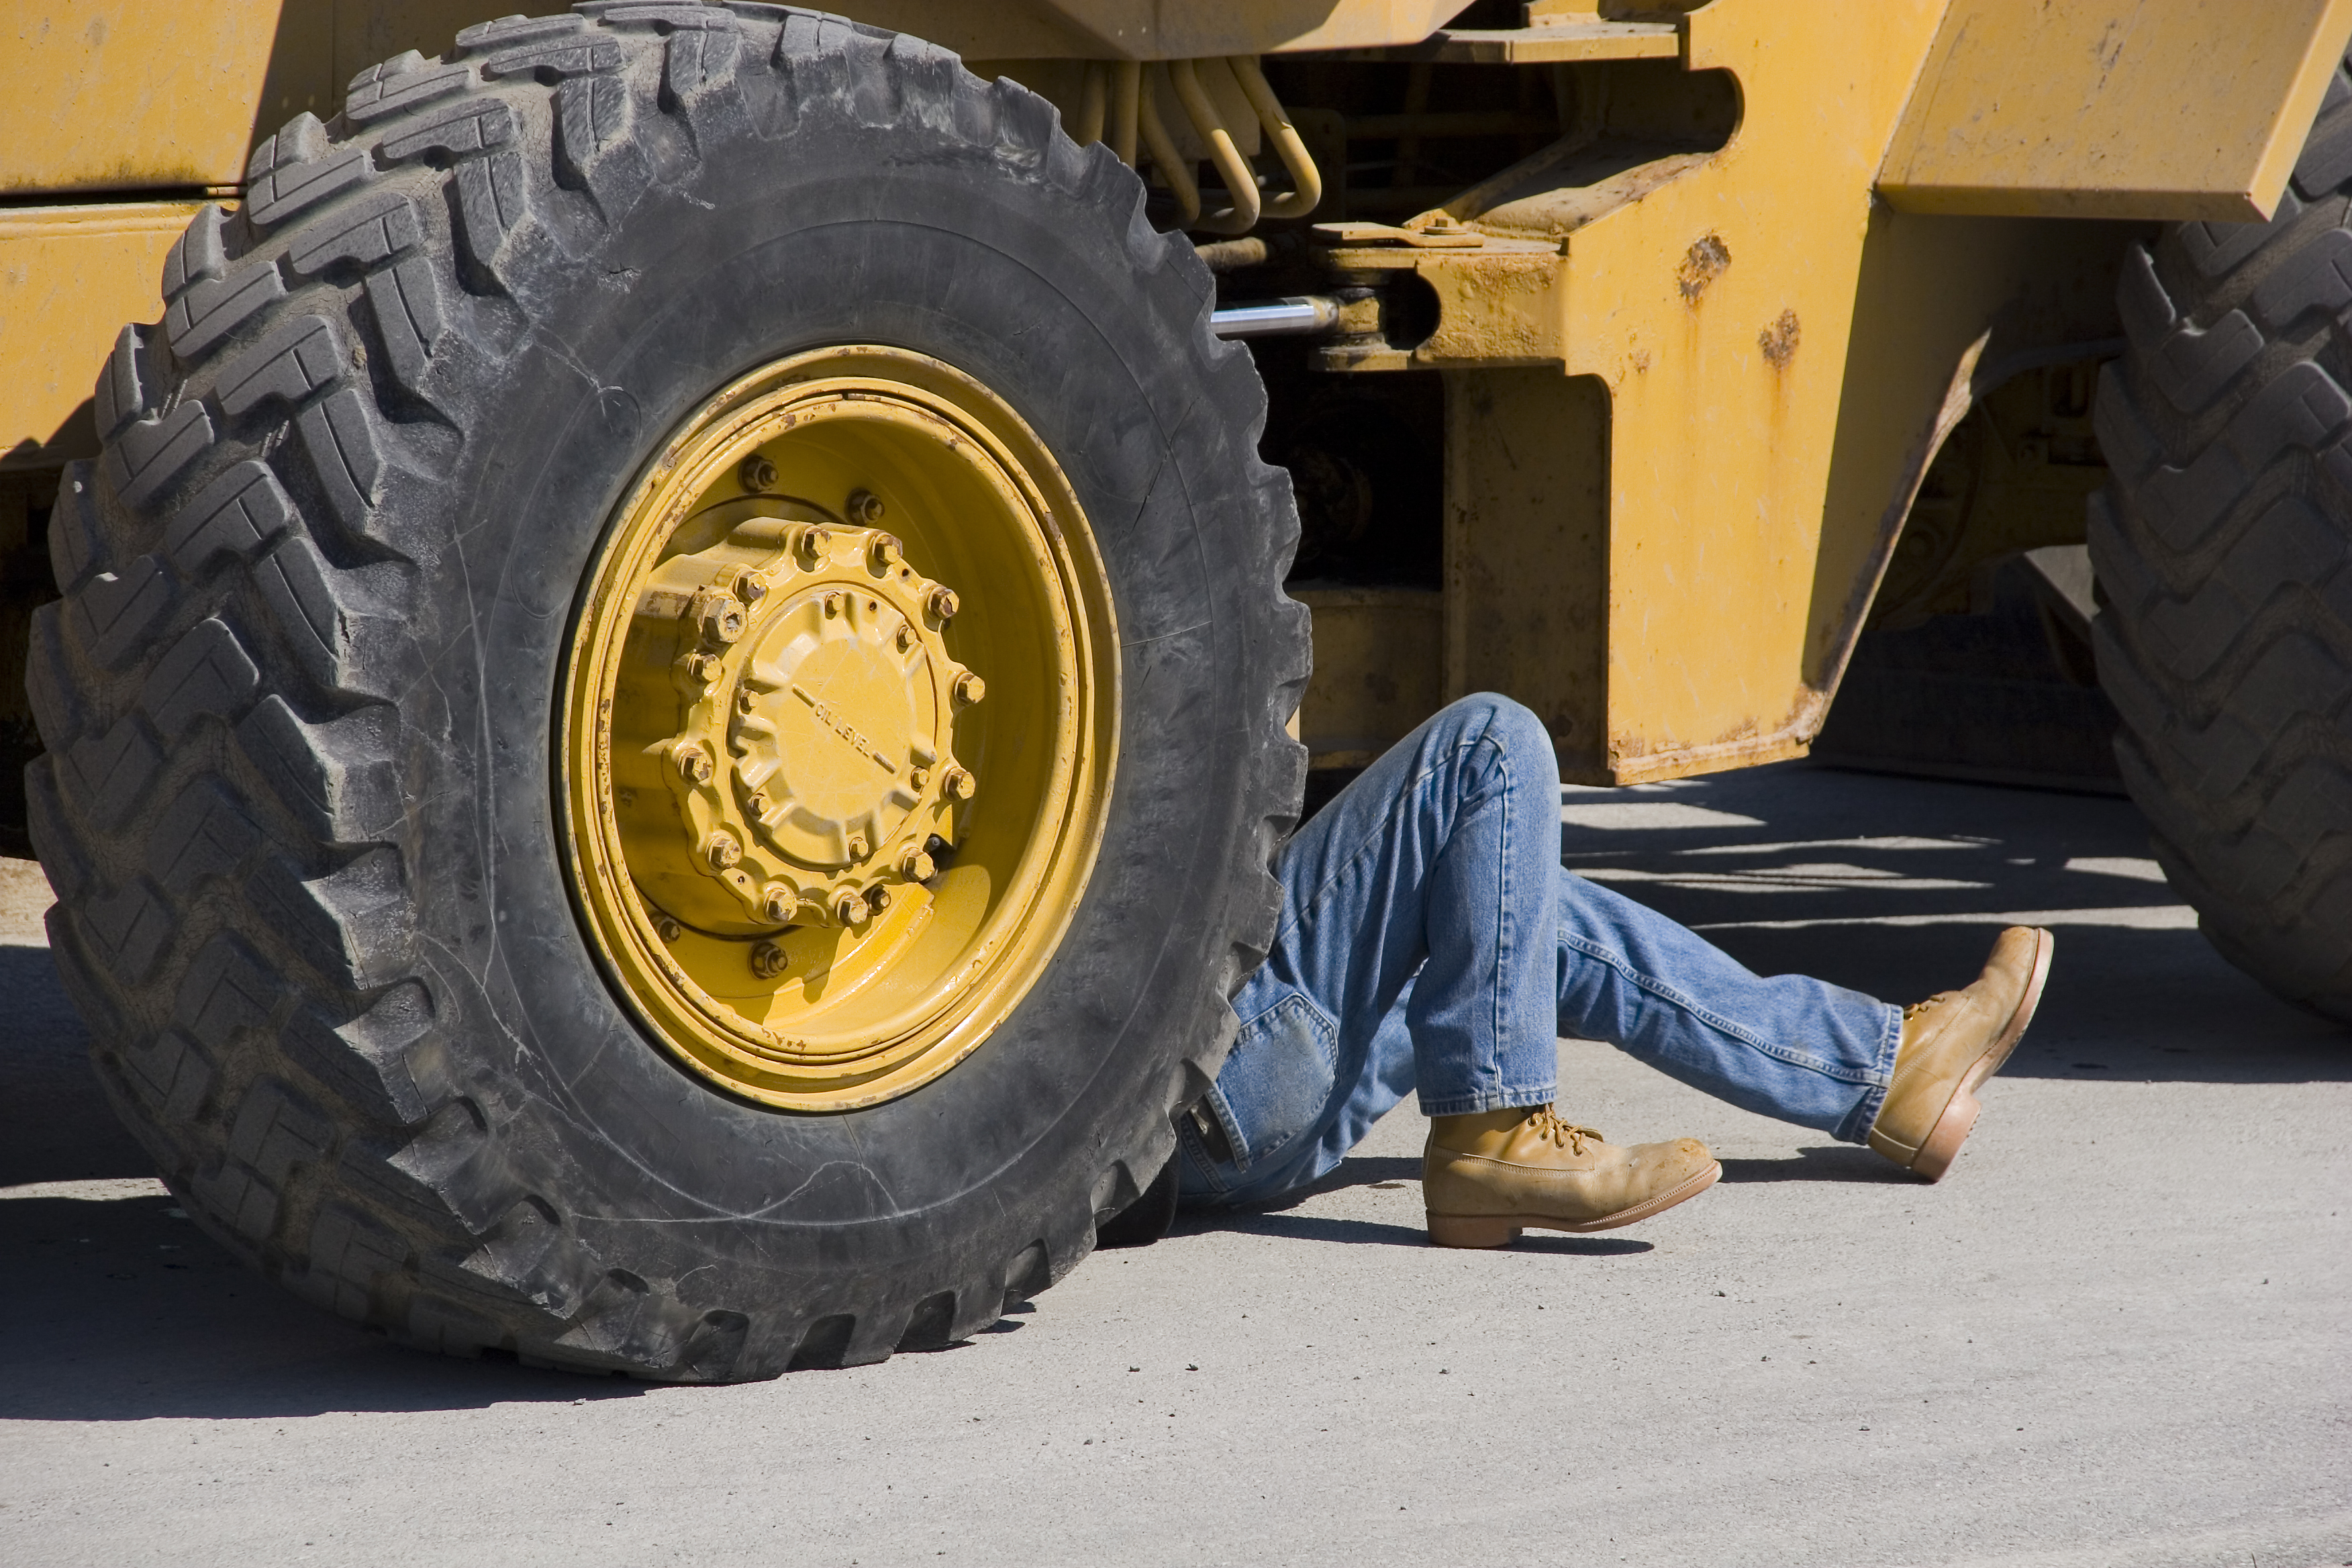 A field services technician can benefit from a rugged laptop for heavy equipment repairs.